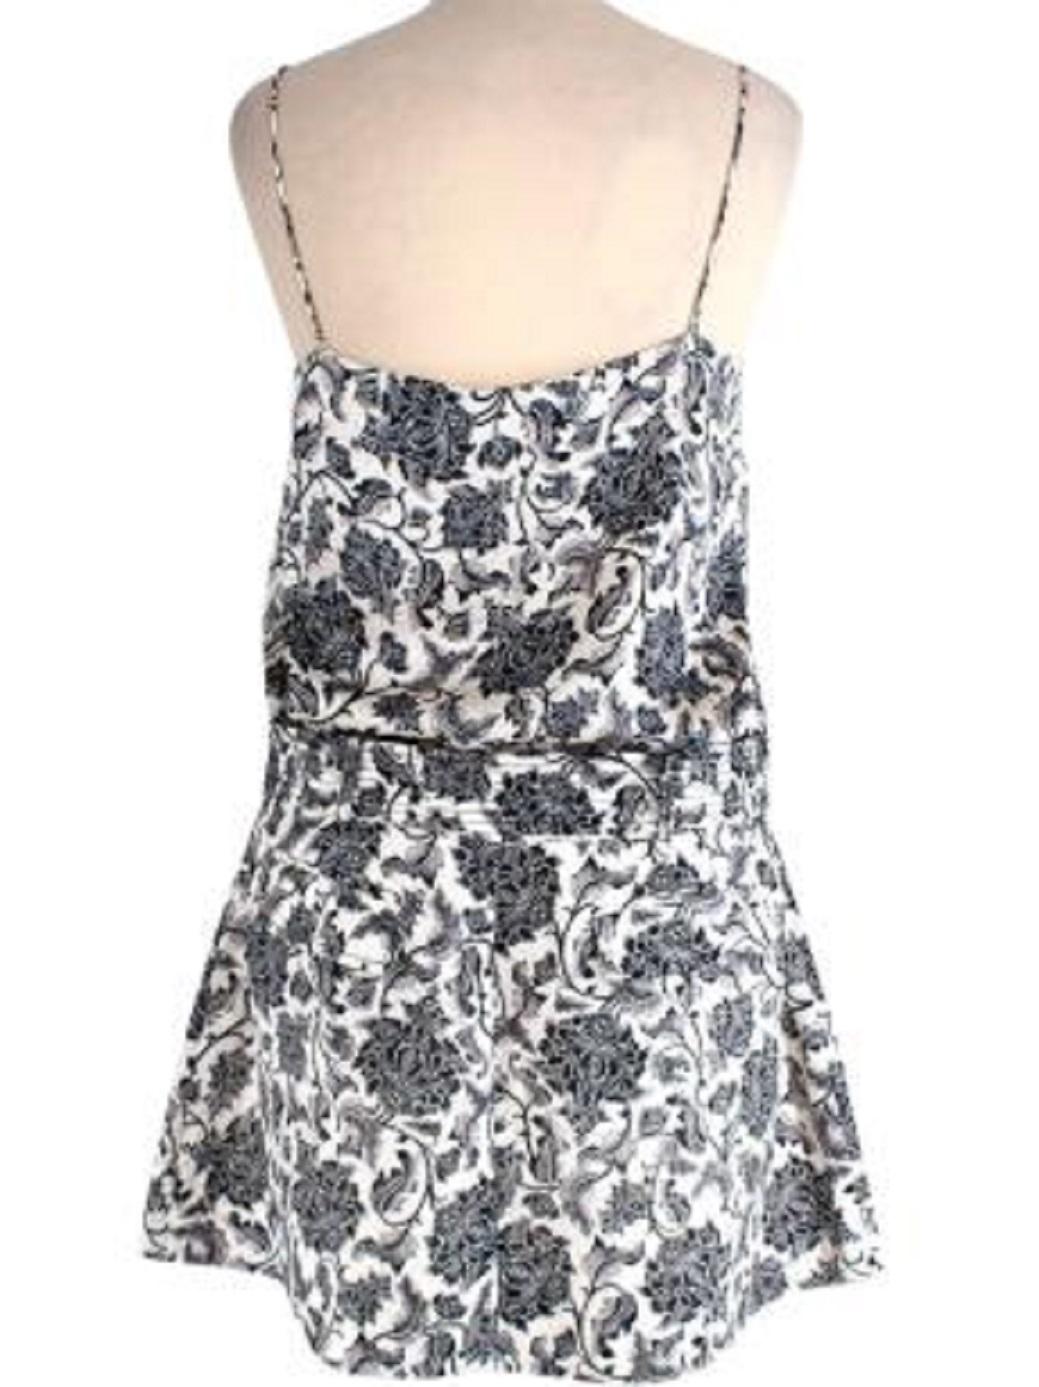 Zimmermann Black & ivory toile print silk-satin camisole & linen skirt

- Made of luscious linen. 
- Perfect fitting camisole and skirt.
- Skirt has 2 front and 1 back pockets.
- Belt feature with the skirt.
- Floral print on both camisole and